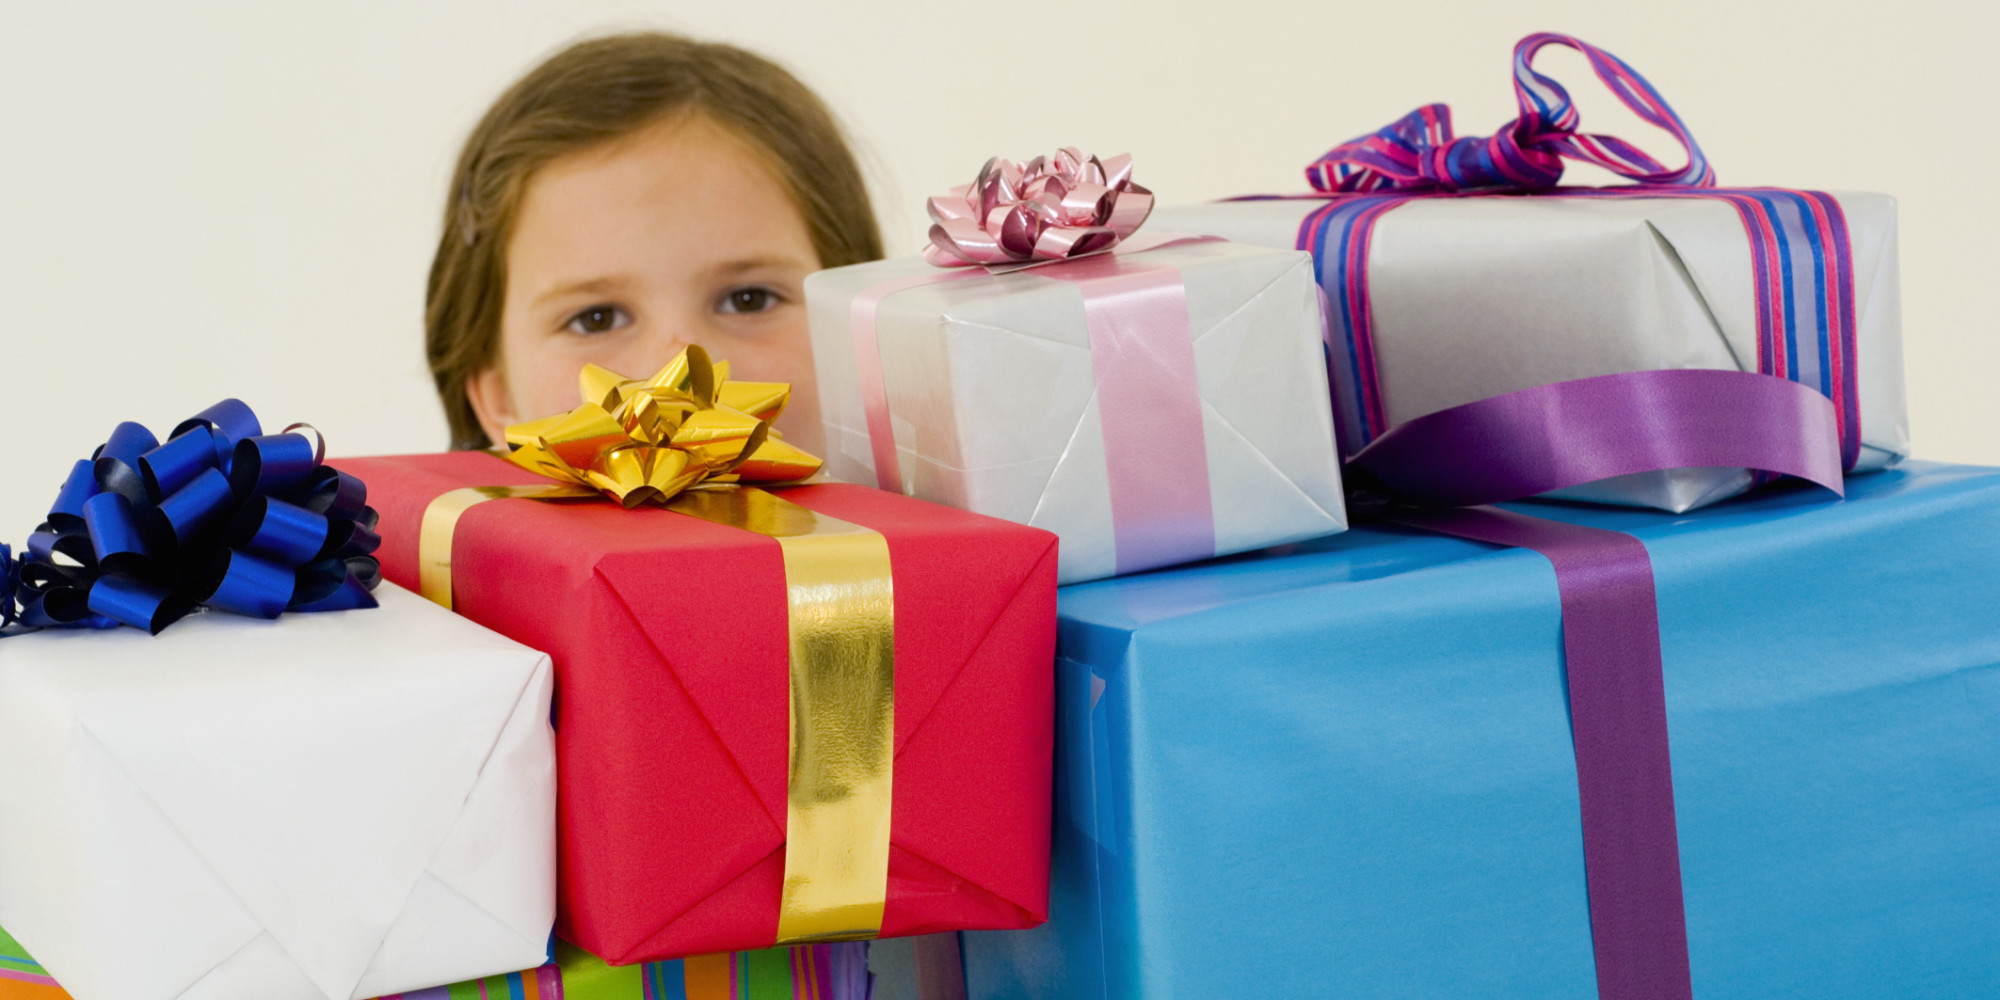 Dr. Shefali Tsabary On The Most Valuable Gift You Can Give Your Child